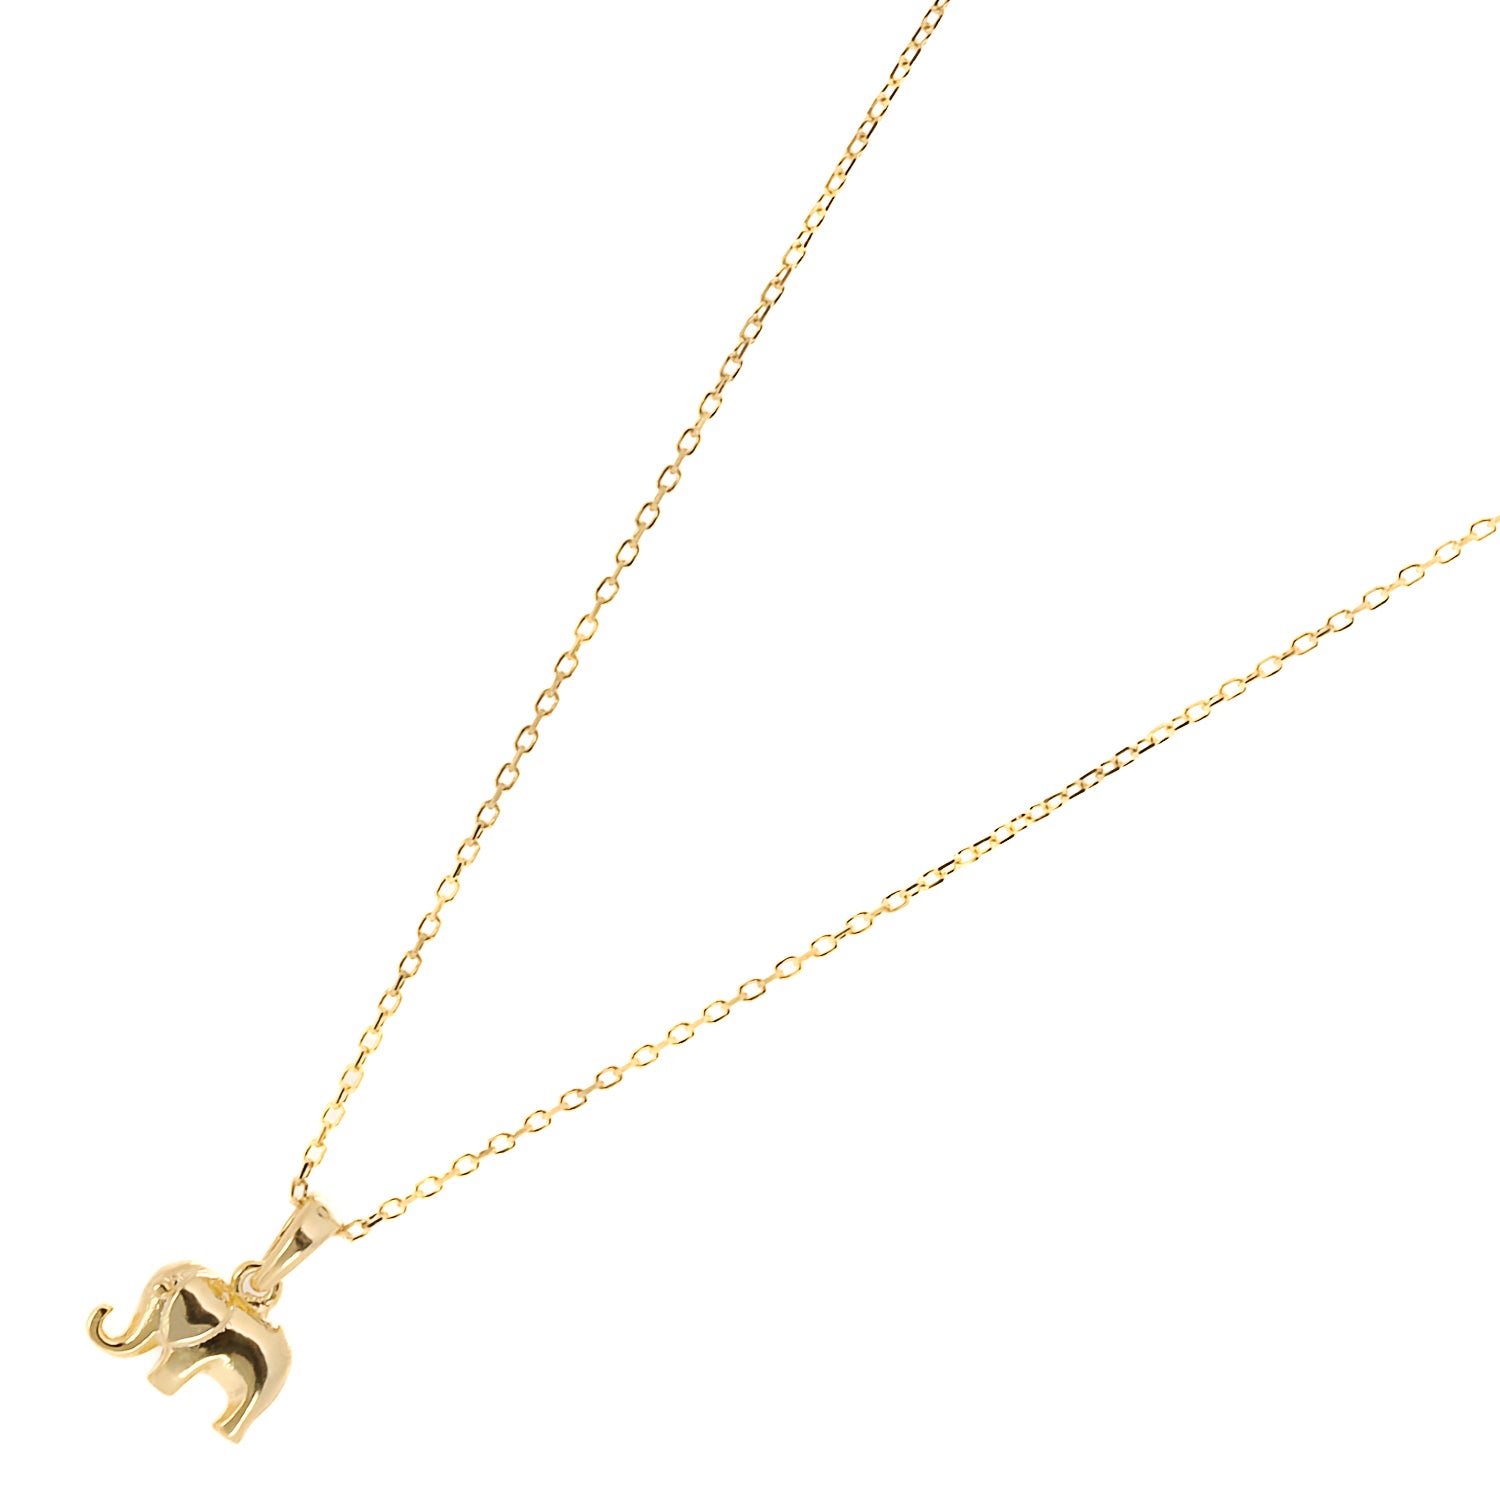 The Dainty Gold Elephant Necklace, a thoughtful gift that symbolizes strength and wisdom, making it perfect for someone special.